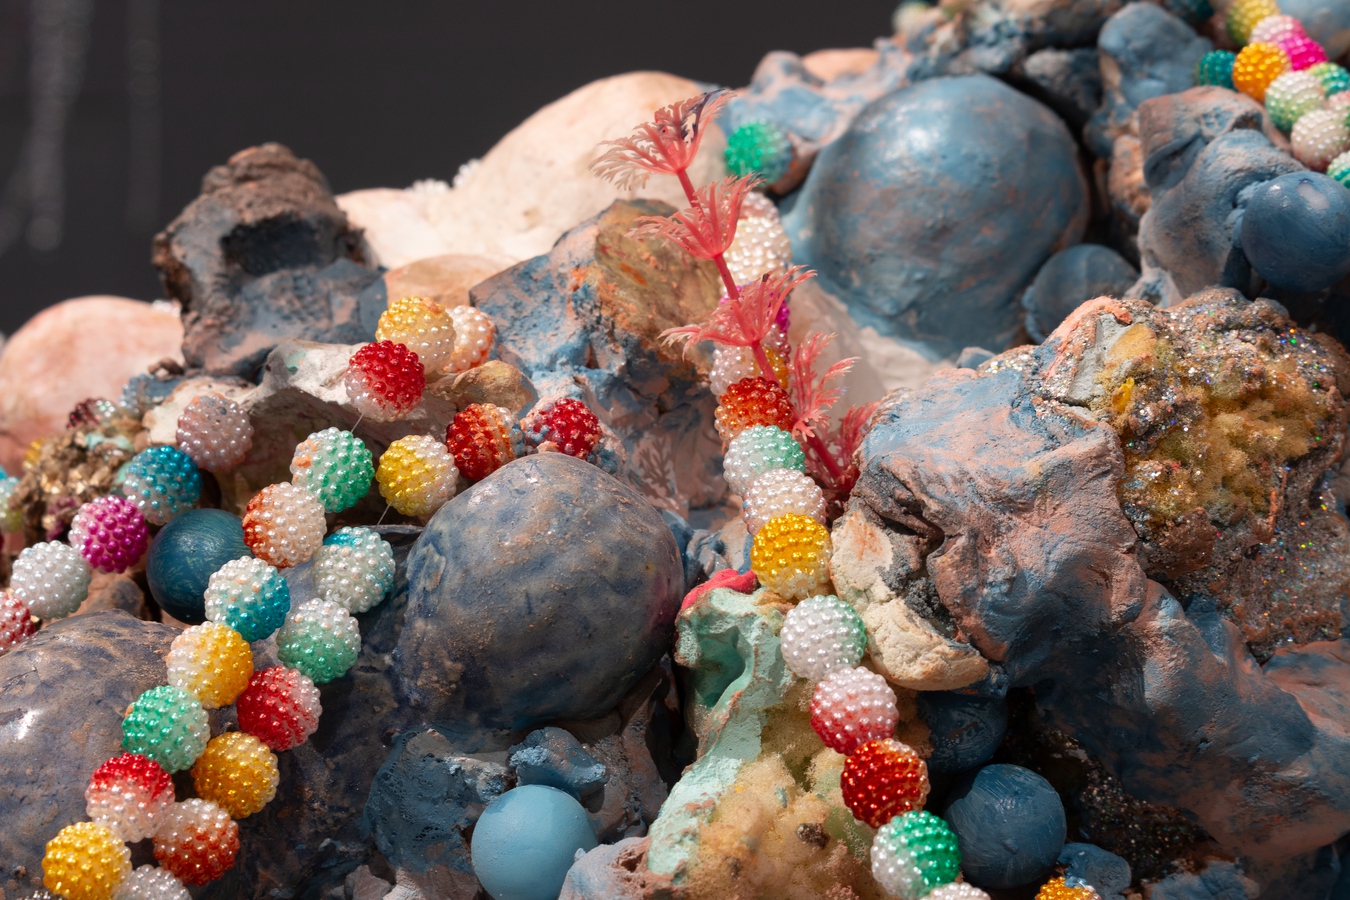 Image: Suji Park, Beatdol II (detail), 2022. Fired clay, ceramic, plastic, foam, epoxy clay, plaster, paper clay, glaze, resin, acrylic paint. Photo by Lindsey de Roos.